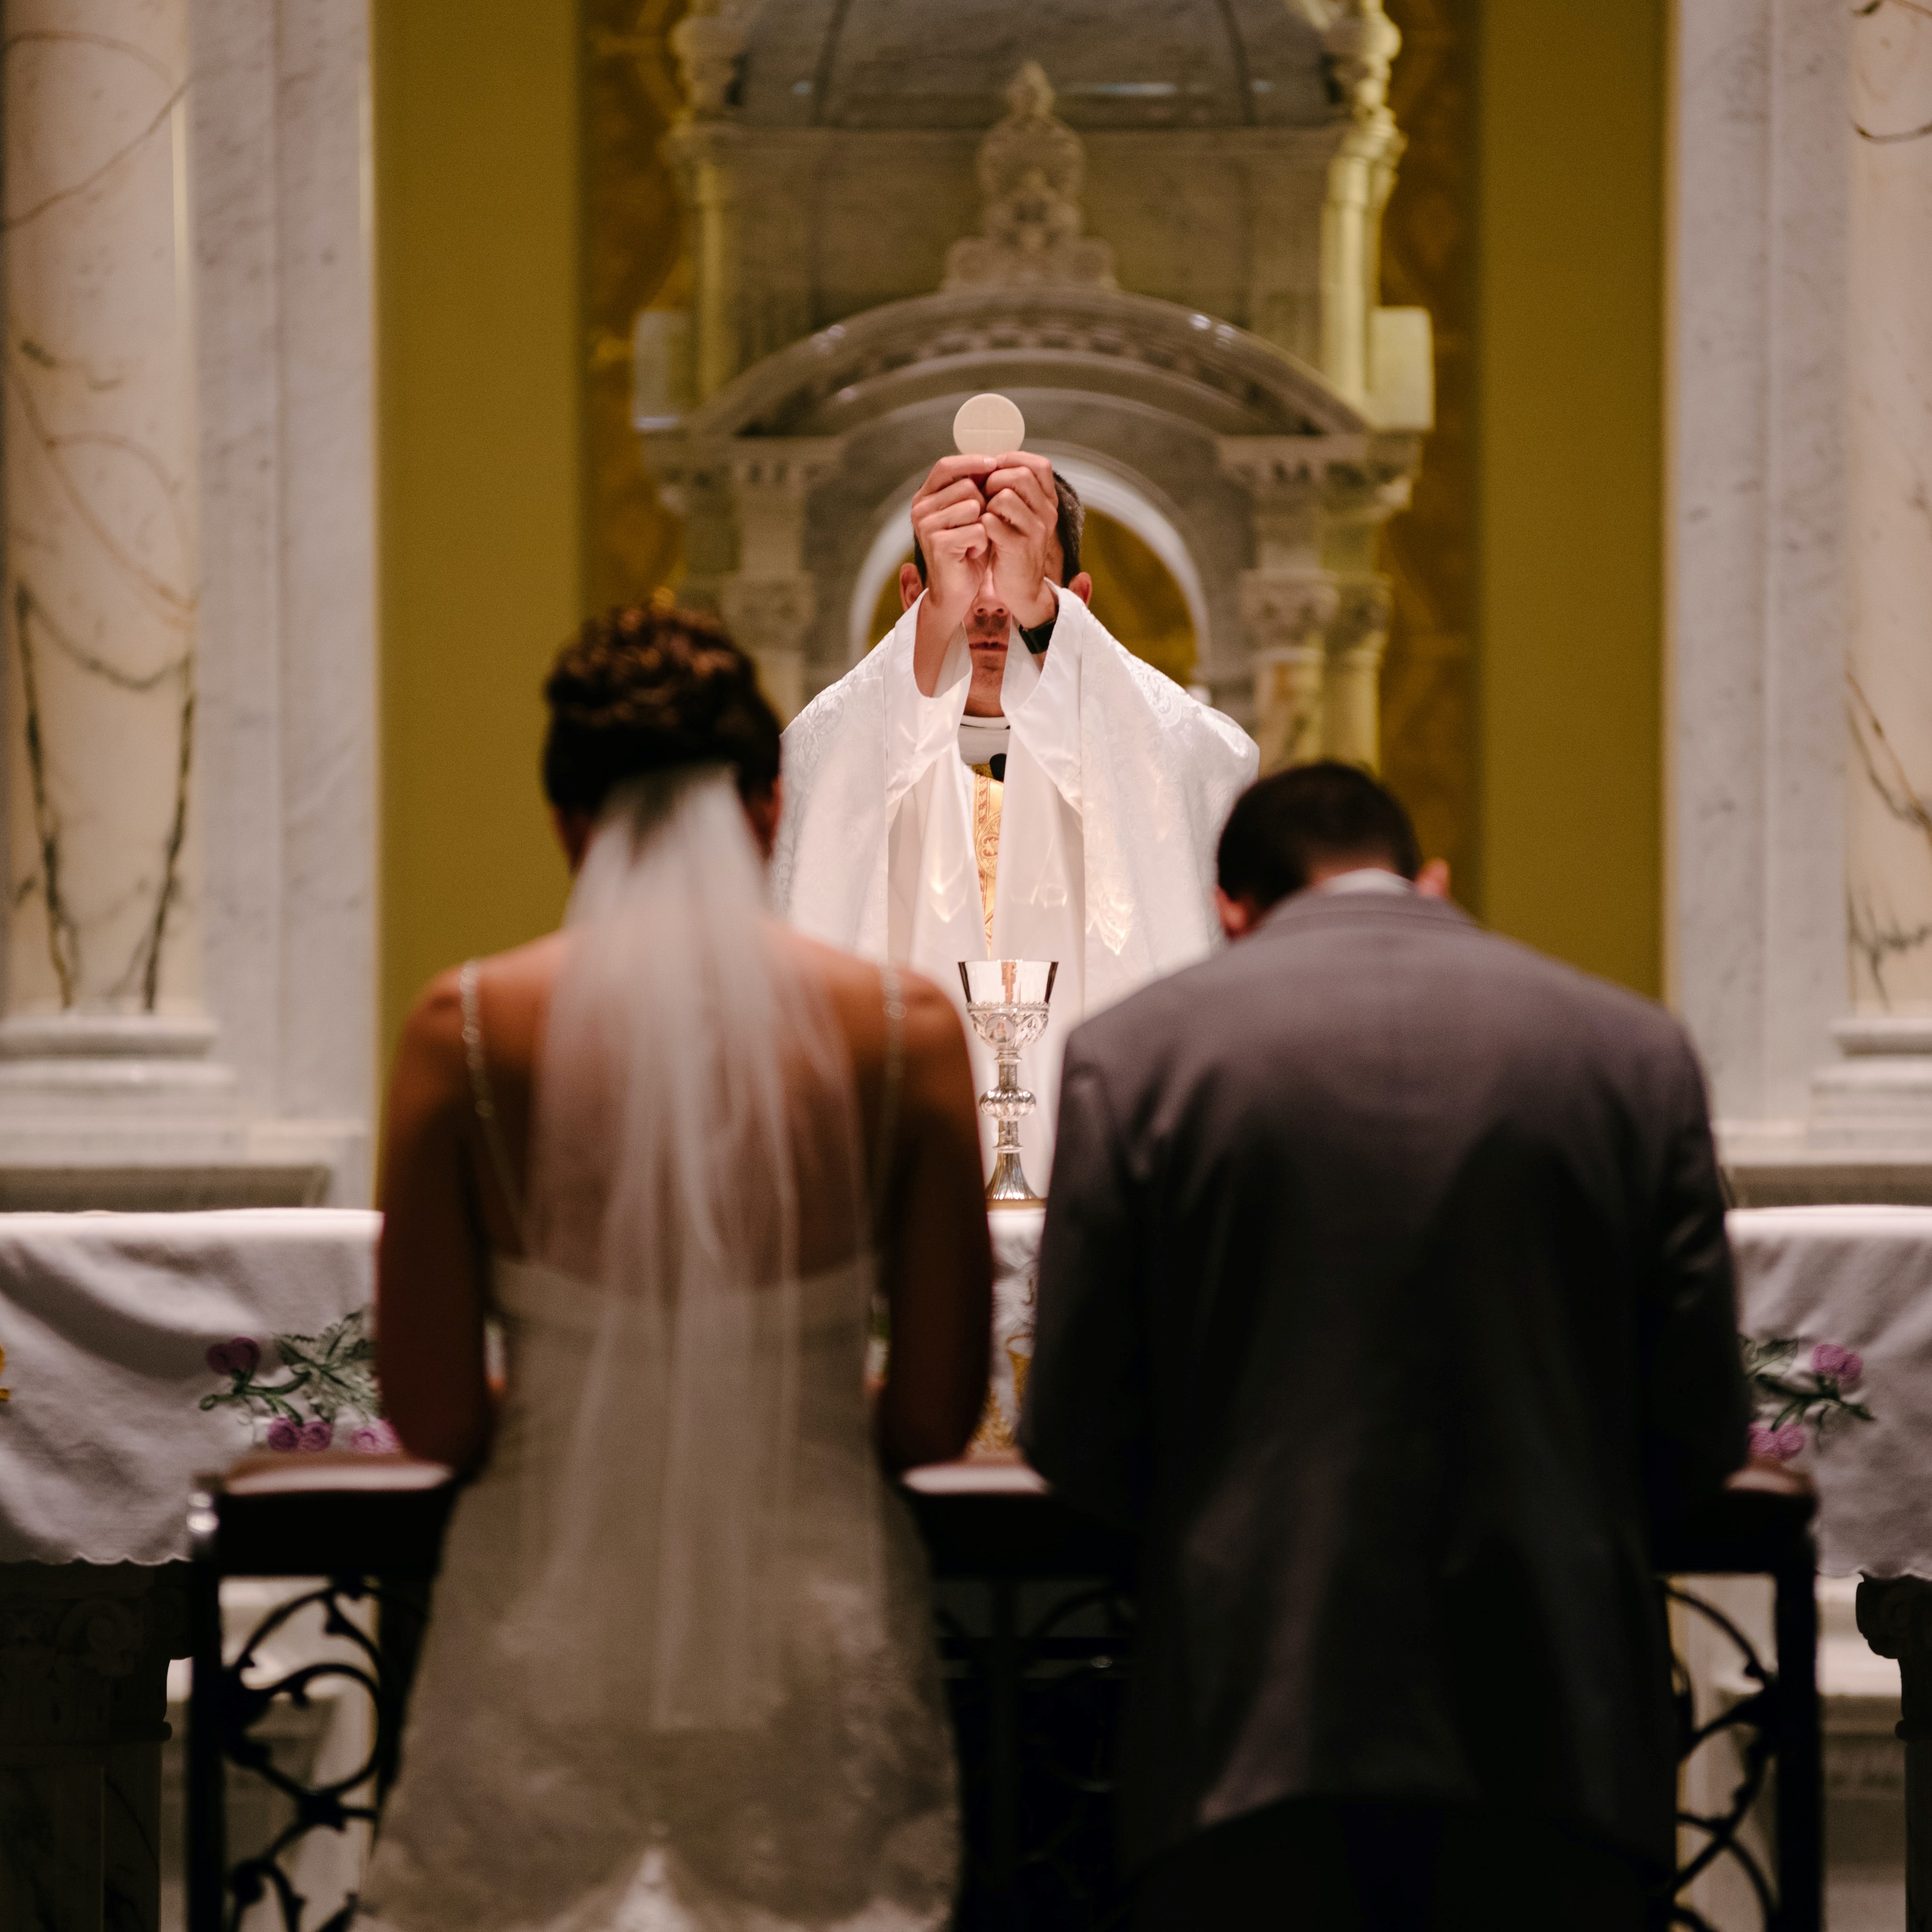 Marriage and the Cross